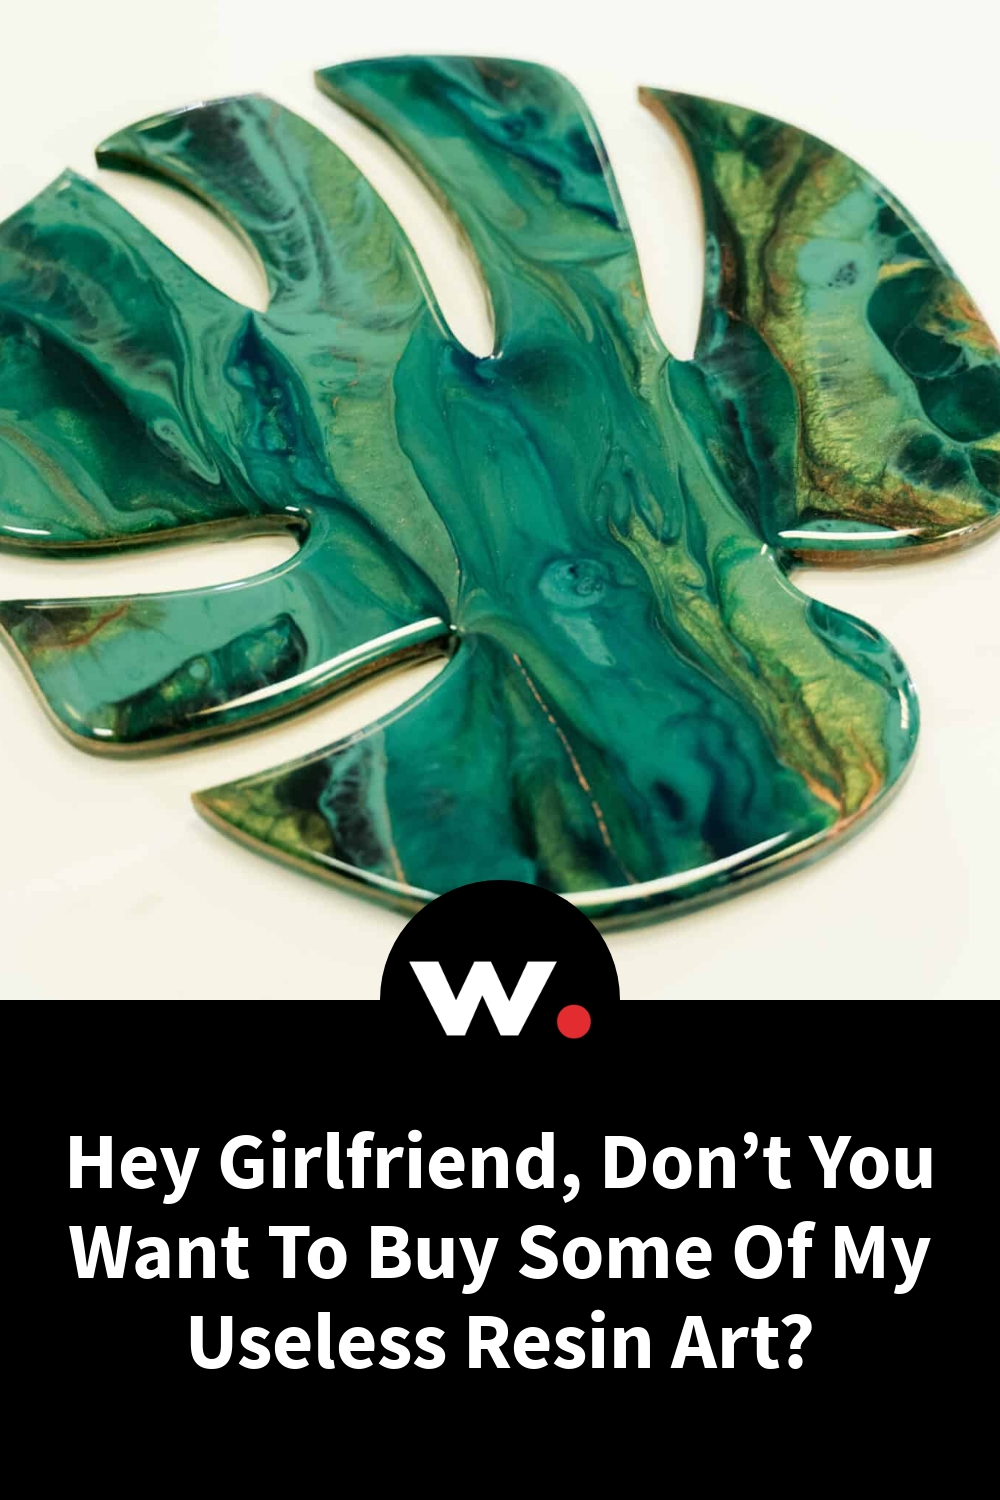 Hey Girlfriend, Don’t You Want To Buy Some Of My Useless Resin Art?